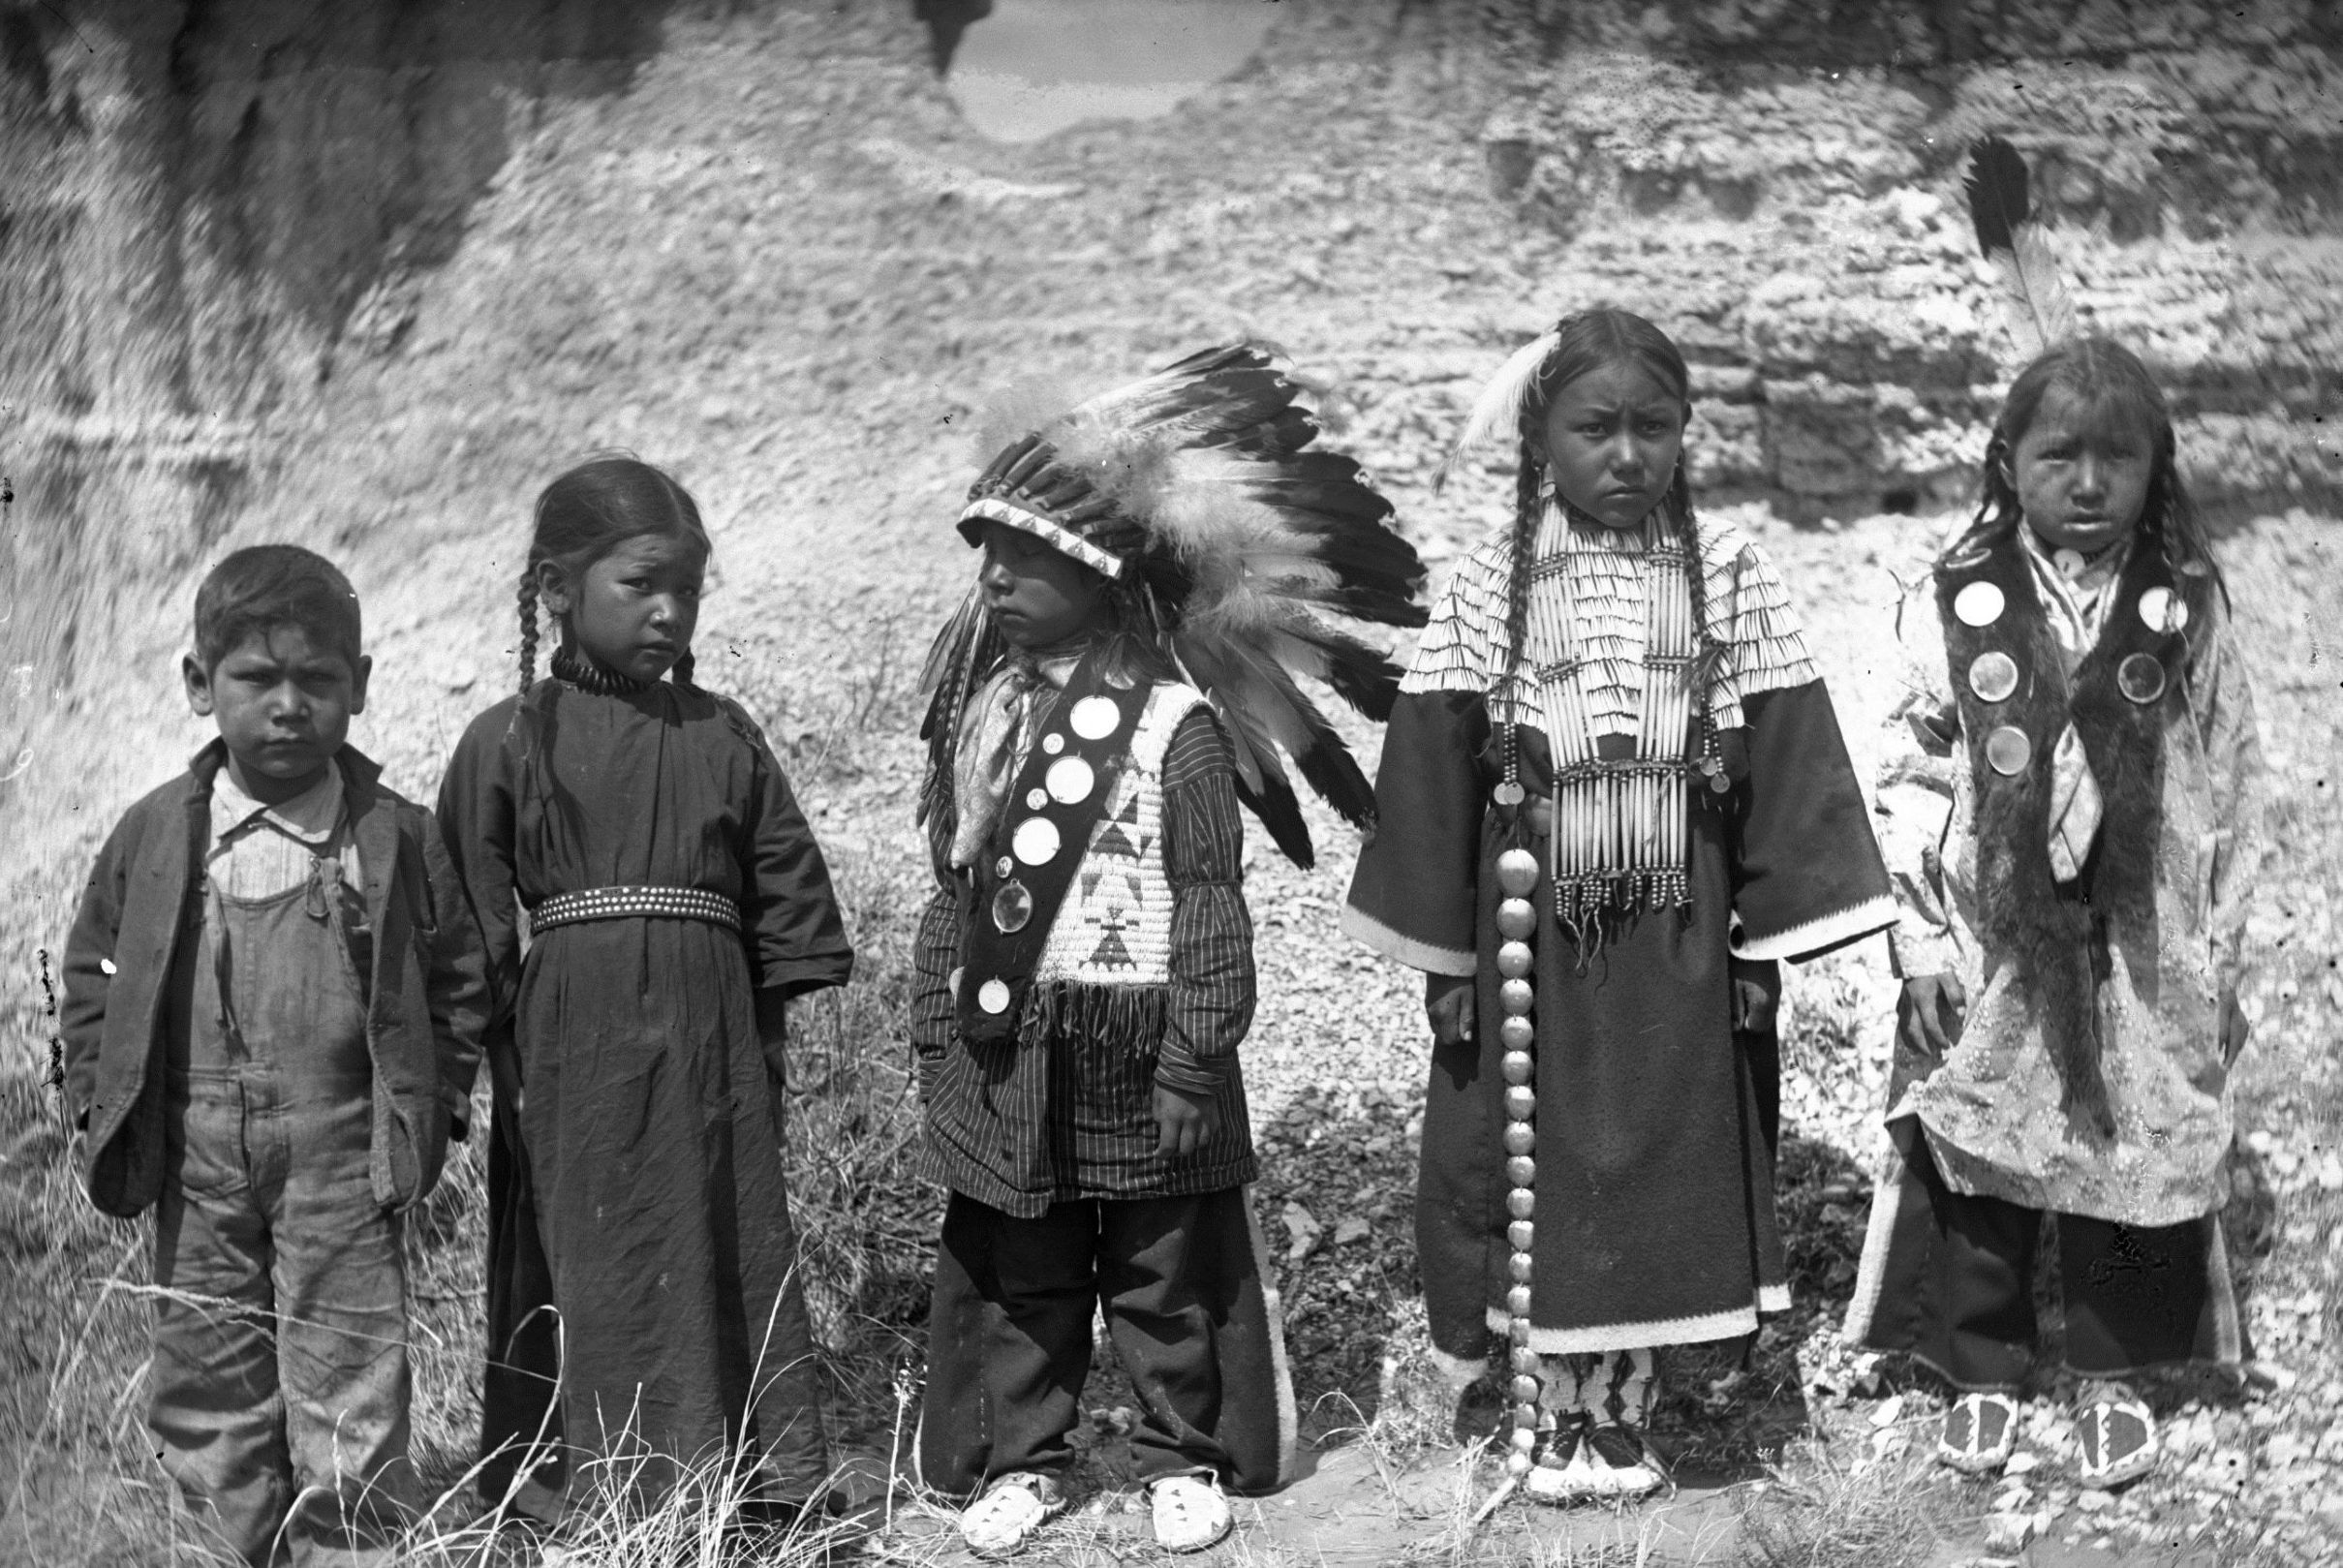 What makes a native American tribe? 